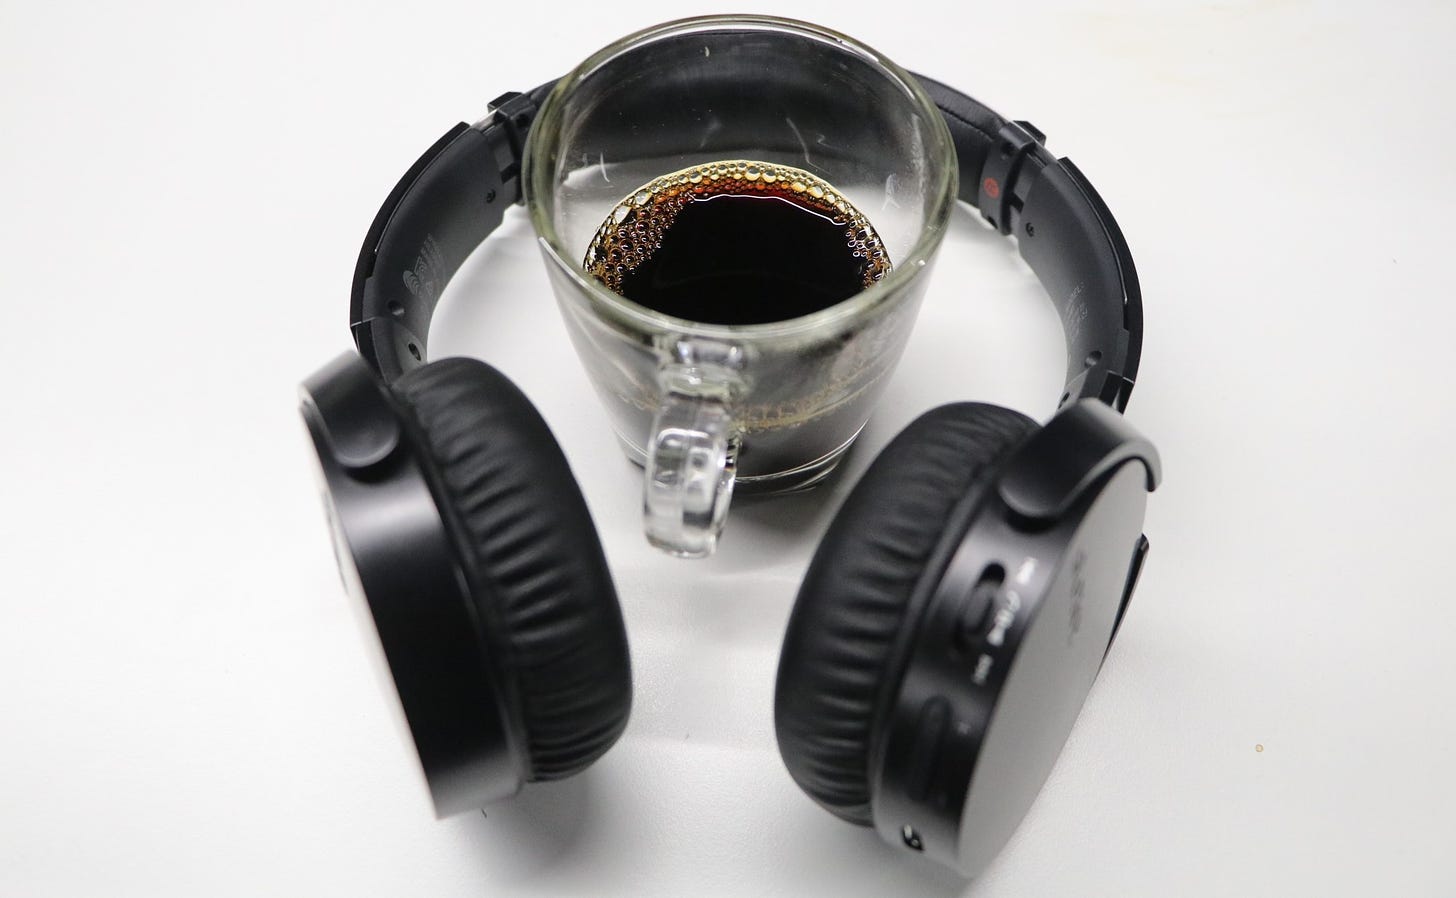 A cup of coffee inside a pair of over-ear headphones on a table